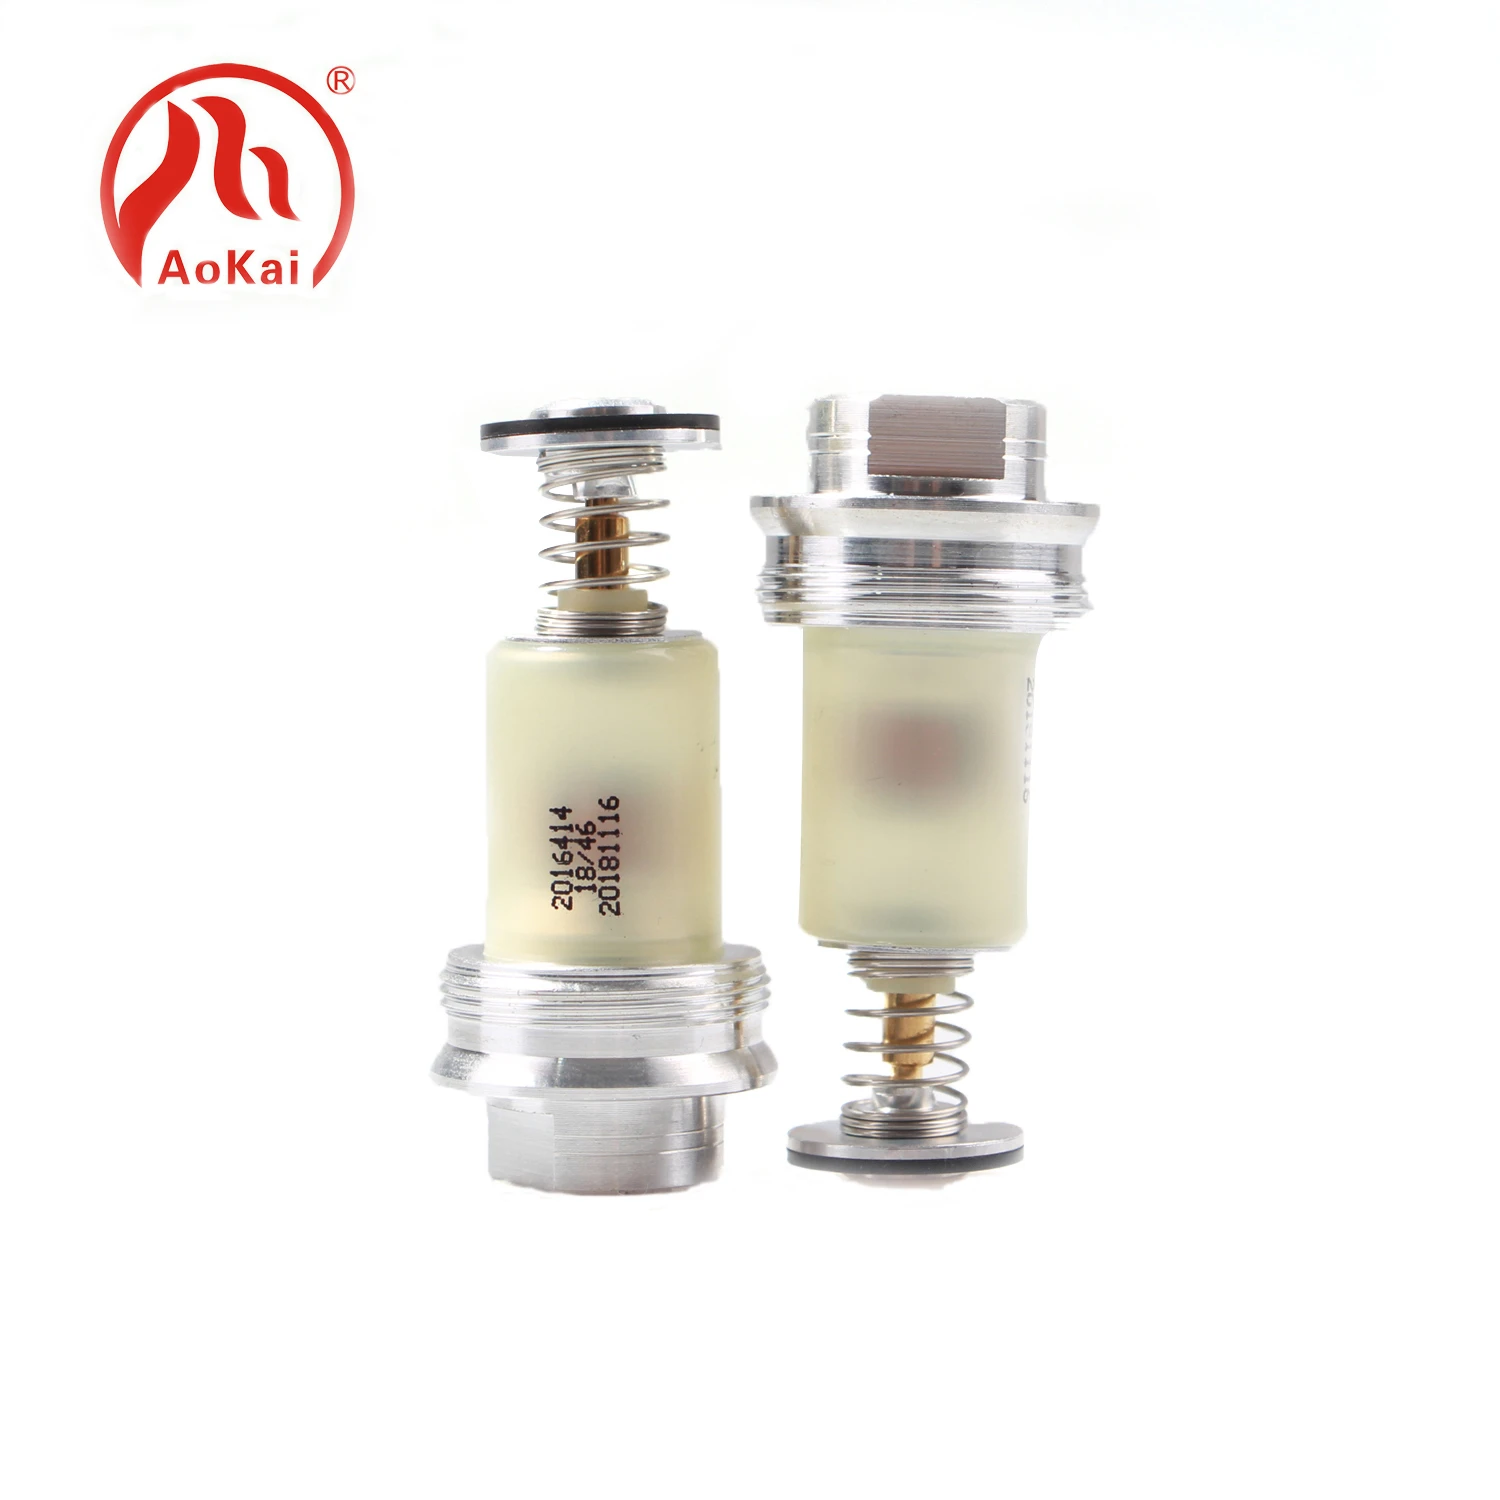 New production parts of gas magnet valve for gas water heater